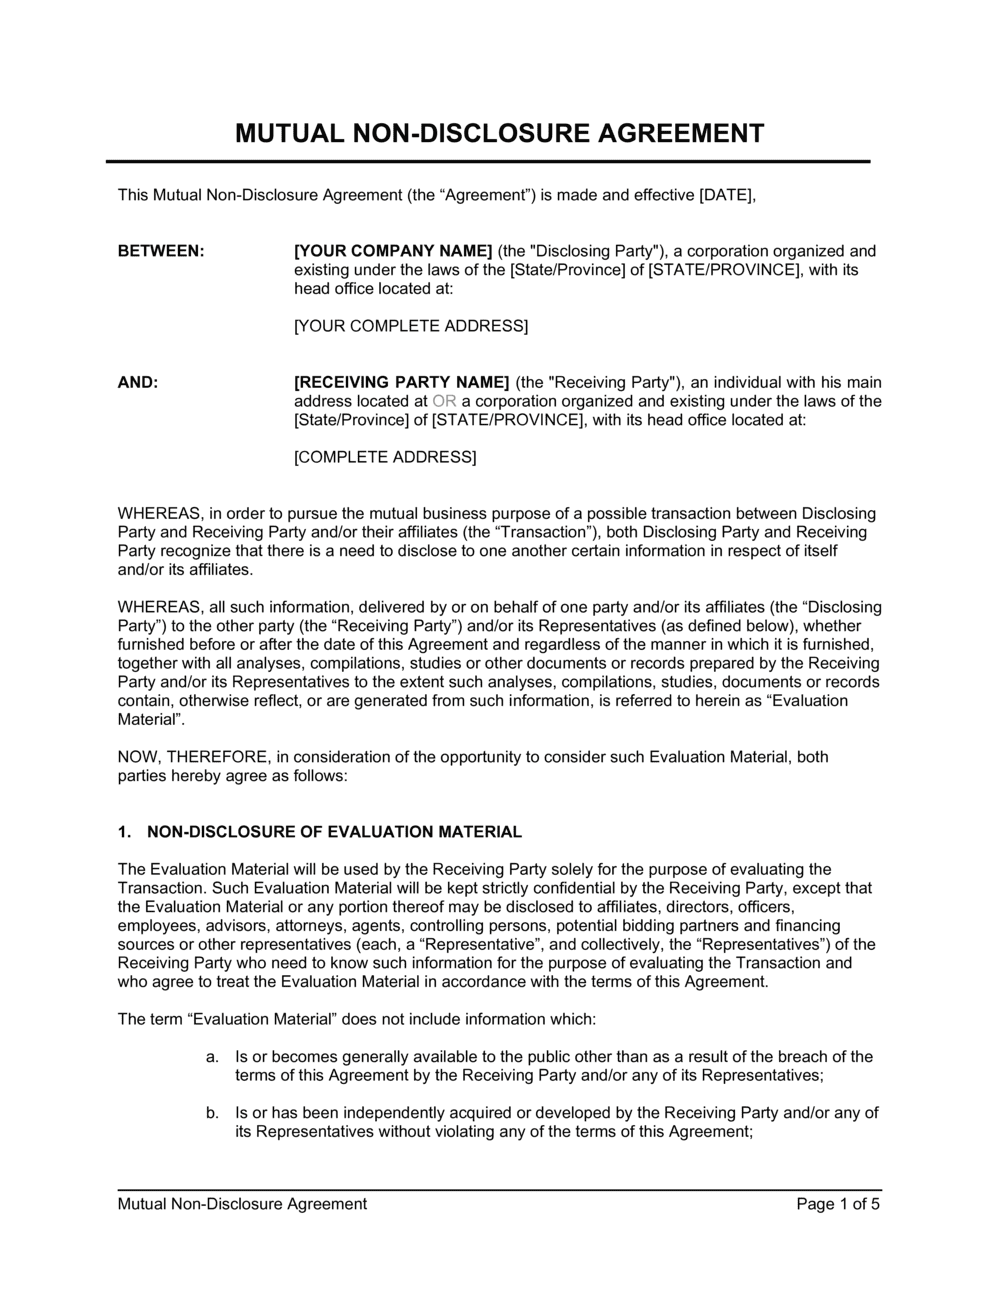 Mutual Non-Disclosure Agreement Template  by Business-in-a-Box™ Pertaining To free mutual non disclosure agreement template